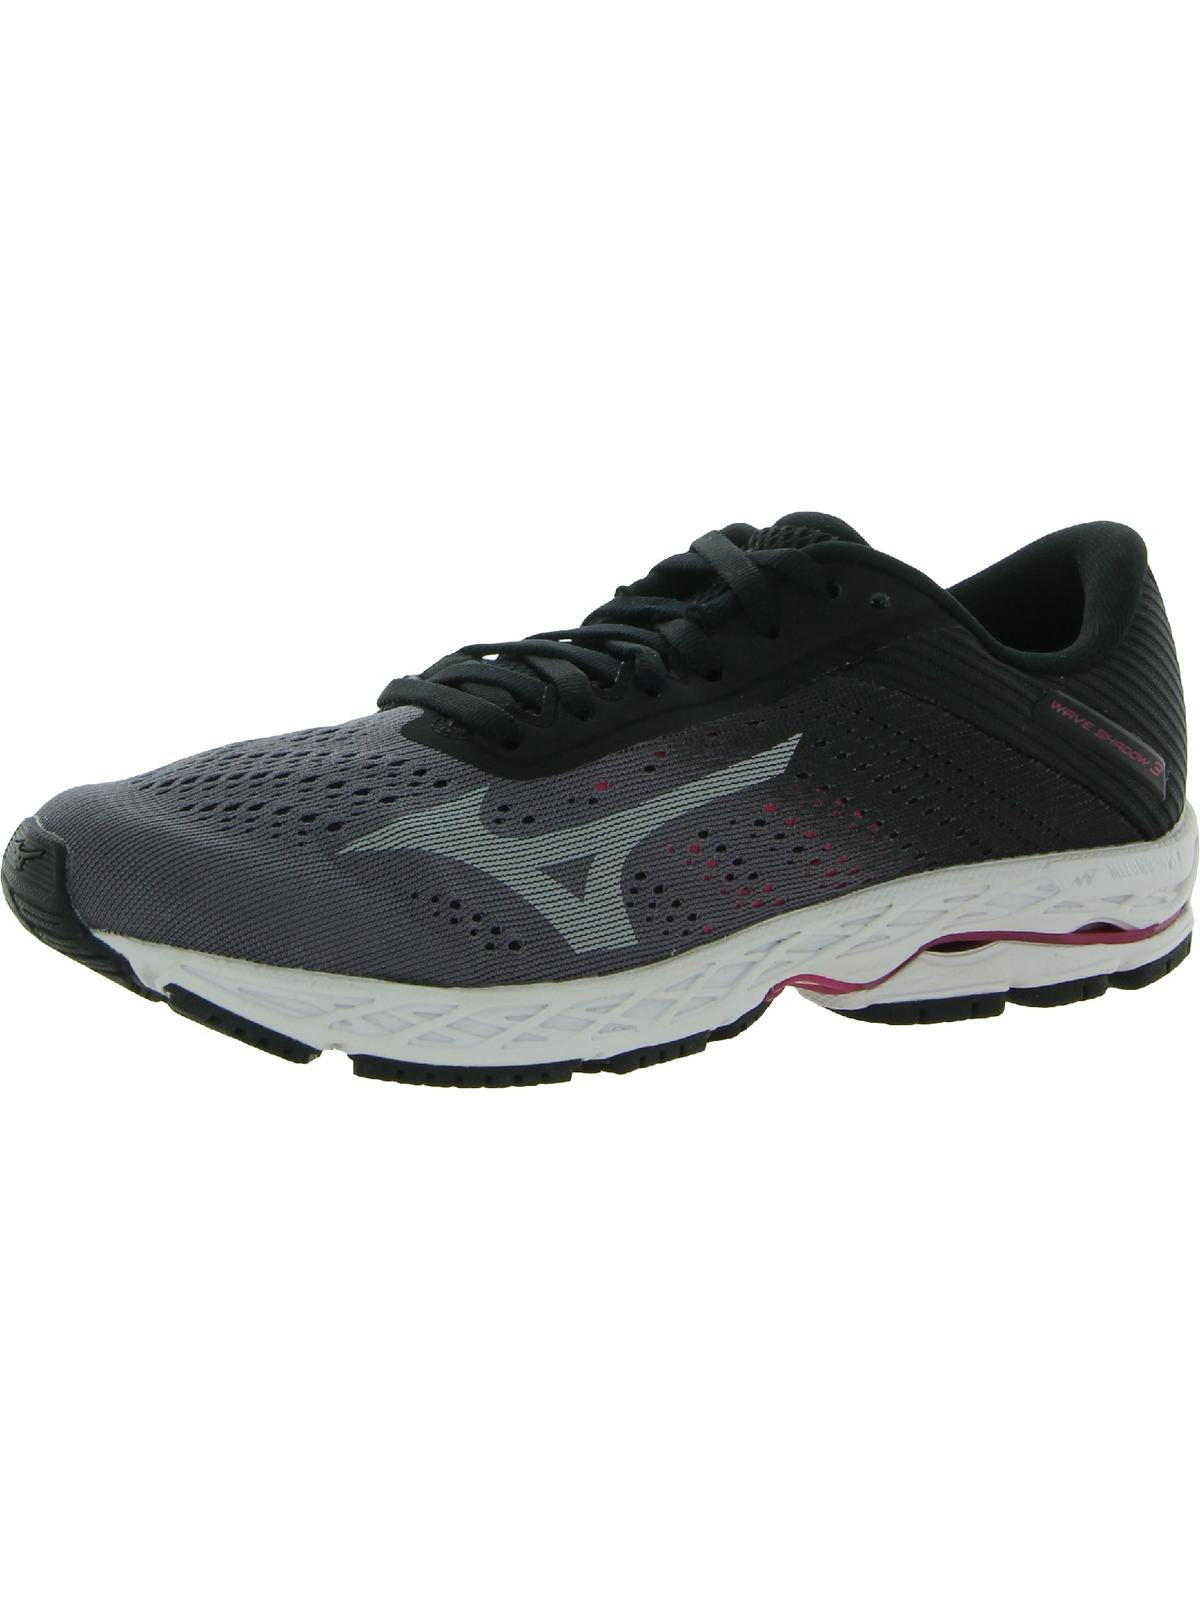 Mizuno Wave Shadow 3 Womens Sport Fitness Running Shoes US 6.5 female